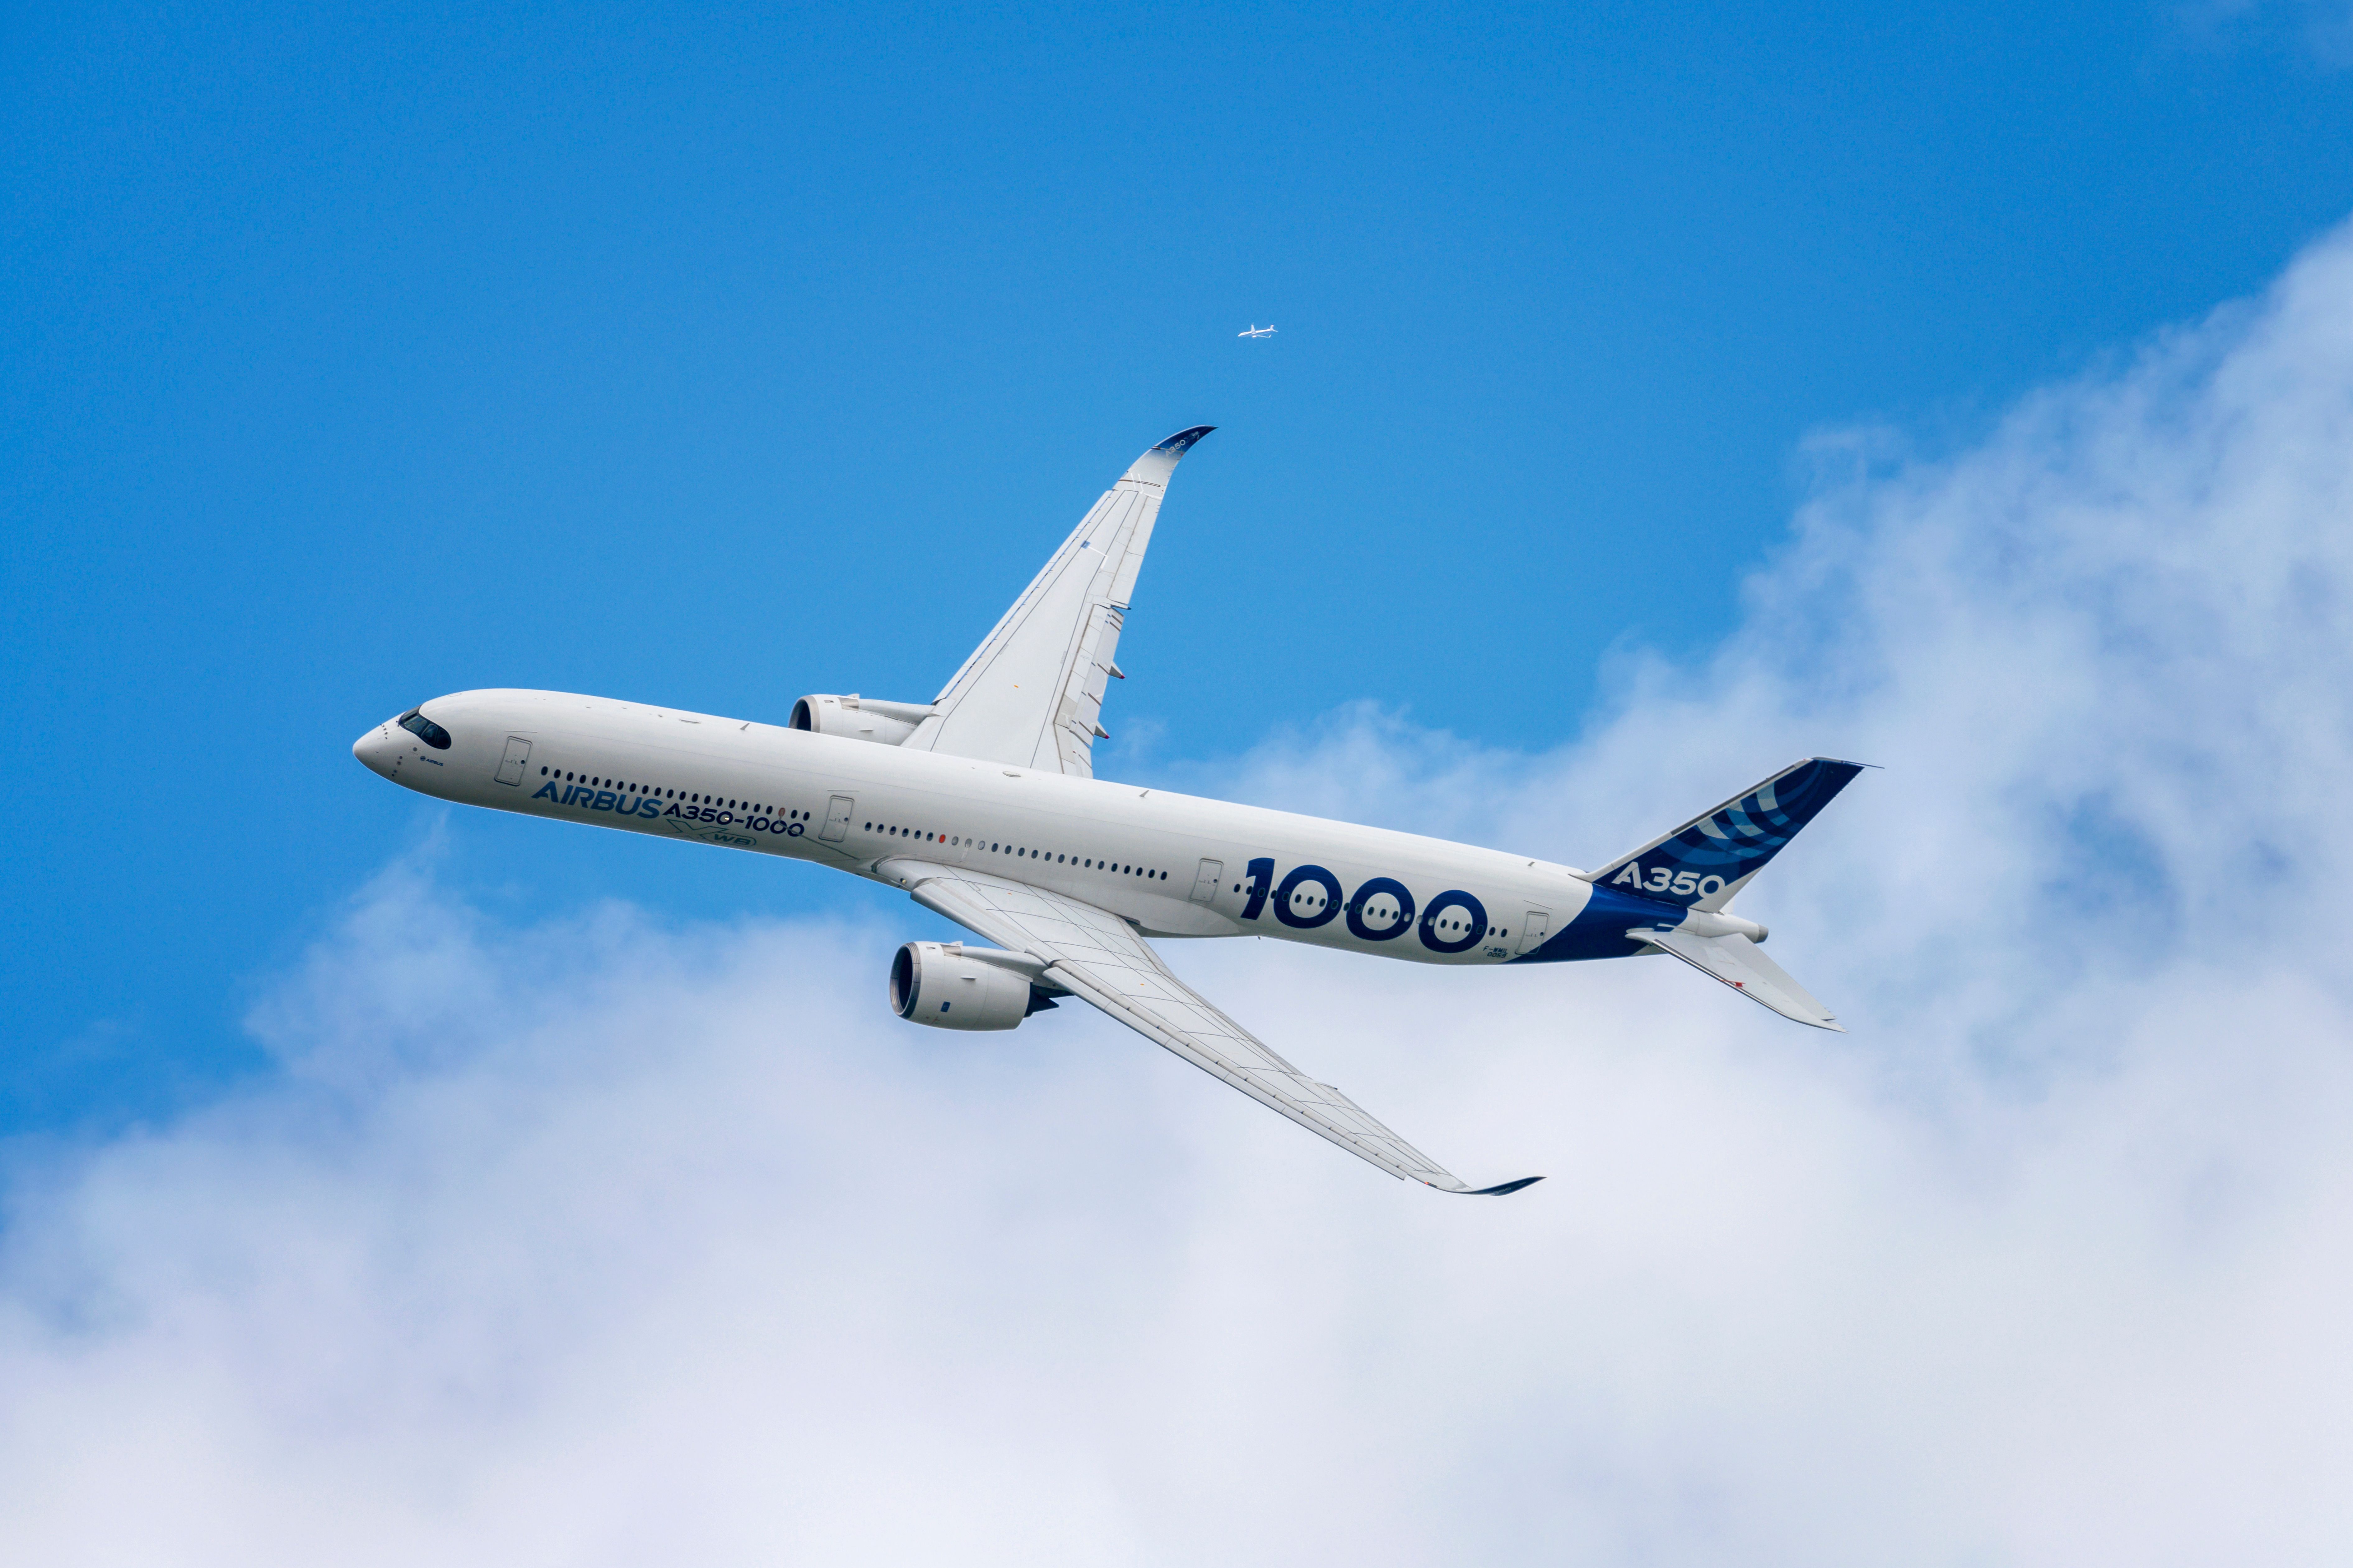 An Airbus A350-1000 flying in the sky.